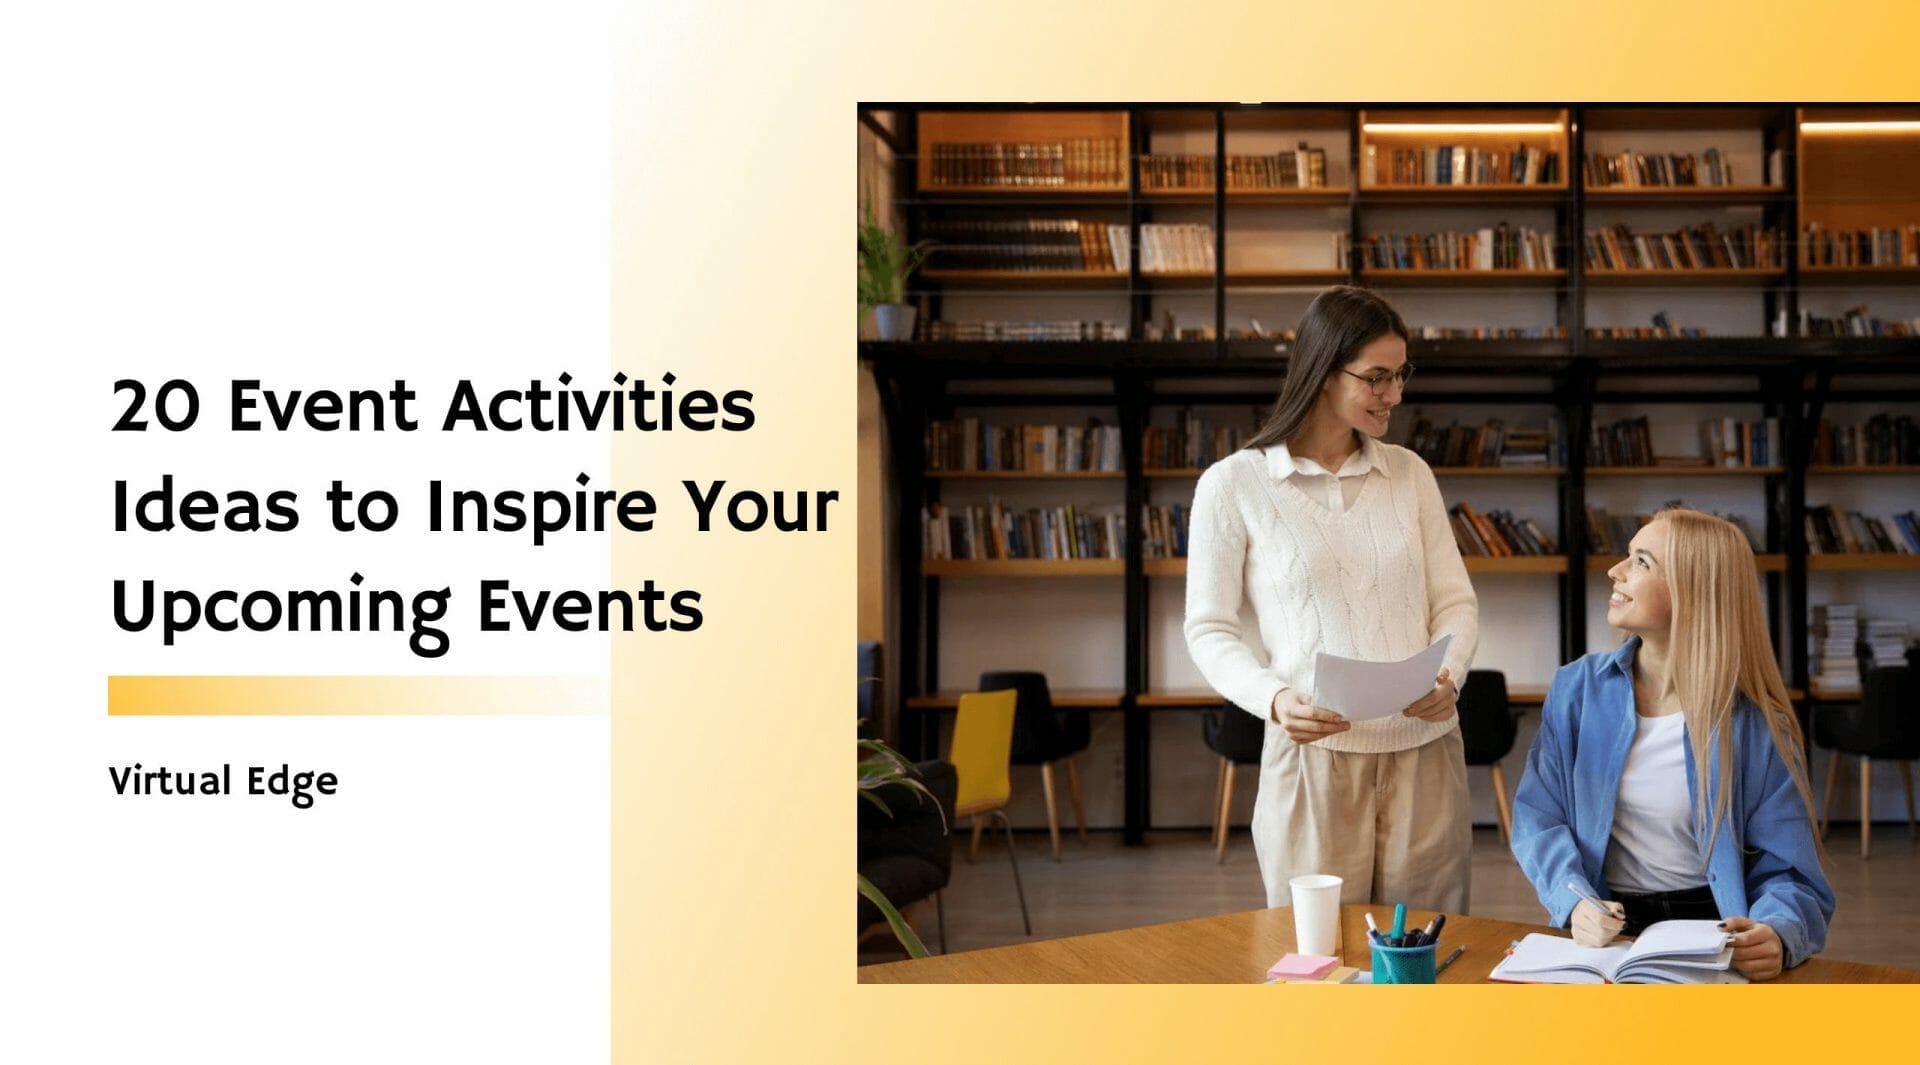 20 Event Activities Ideas to Inspire Your Upcoming Events